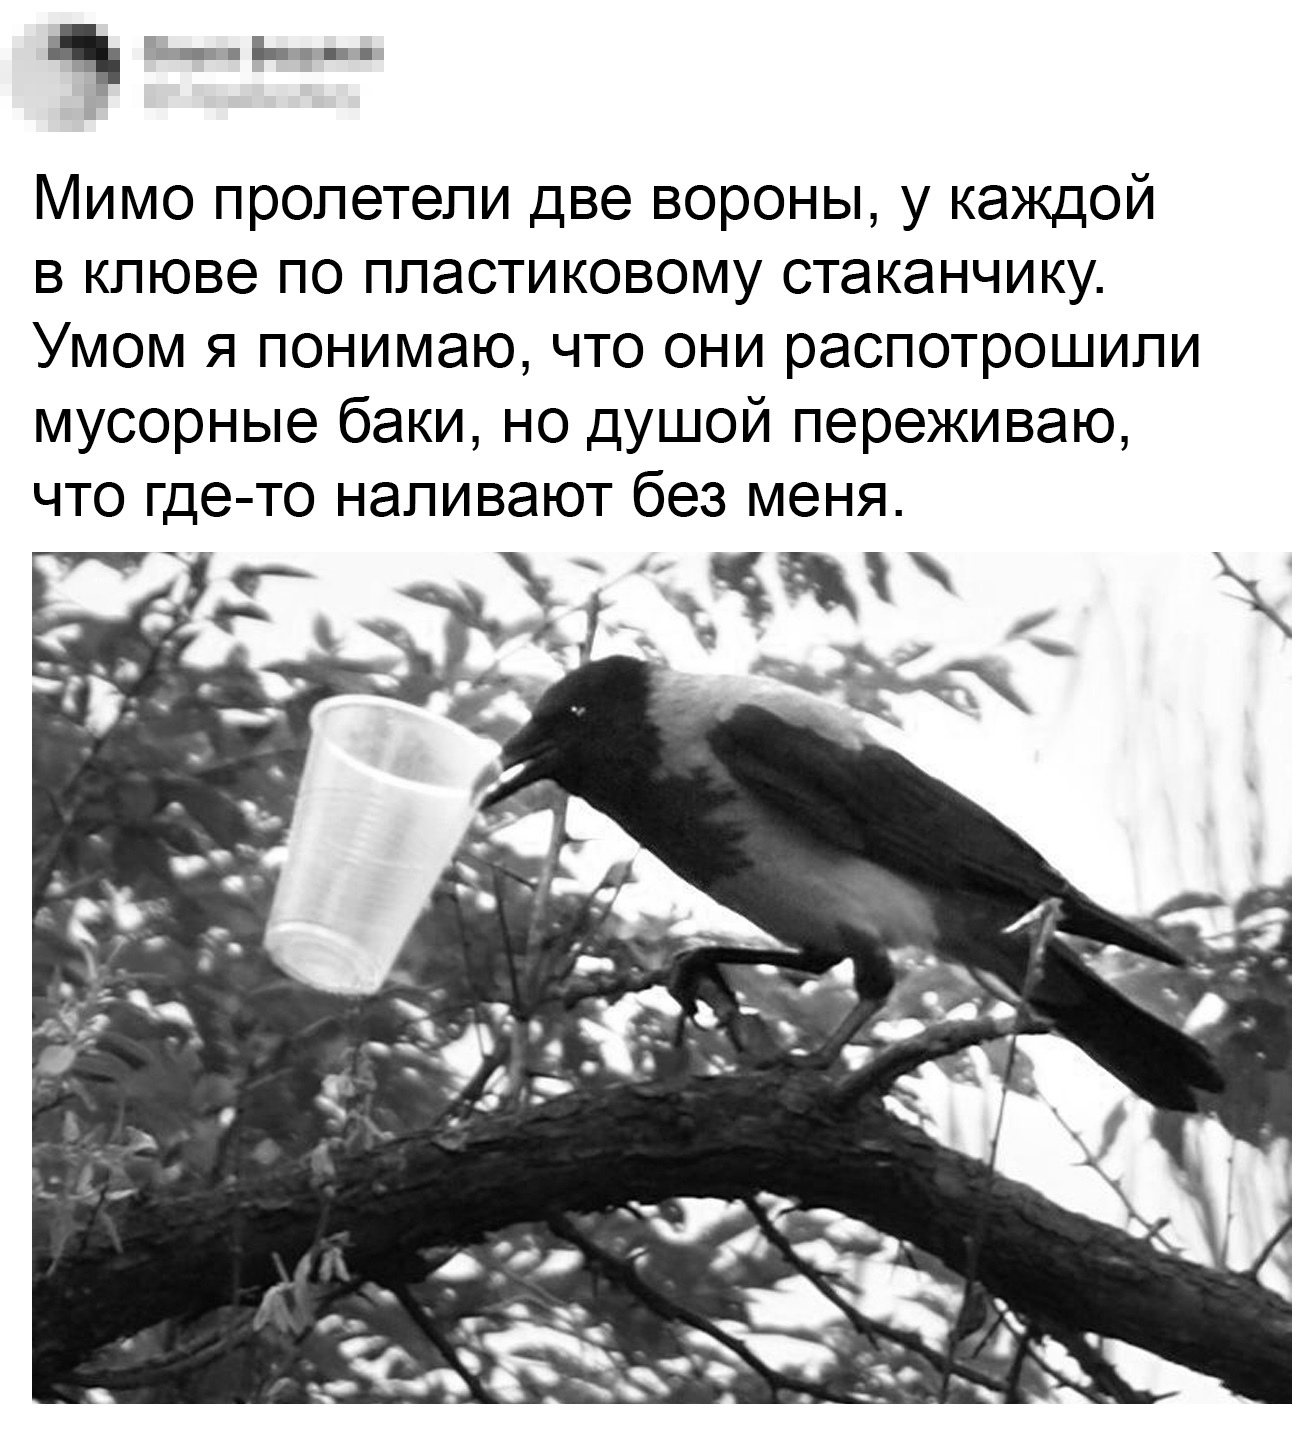 They flew to the rally - Humor, From the network, Picture with text, Crow